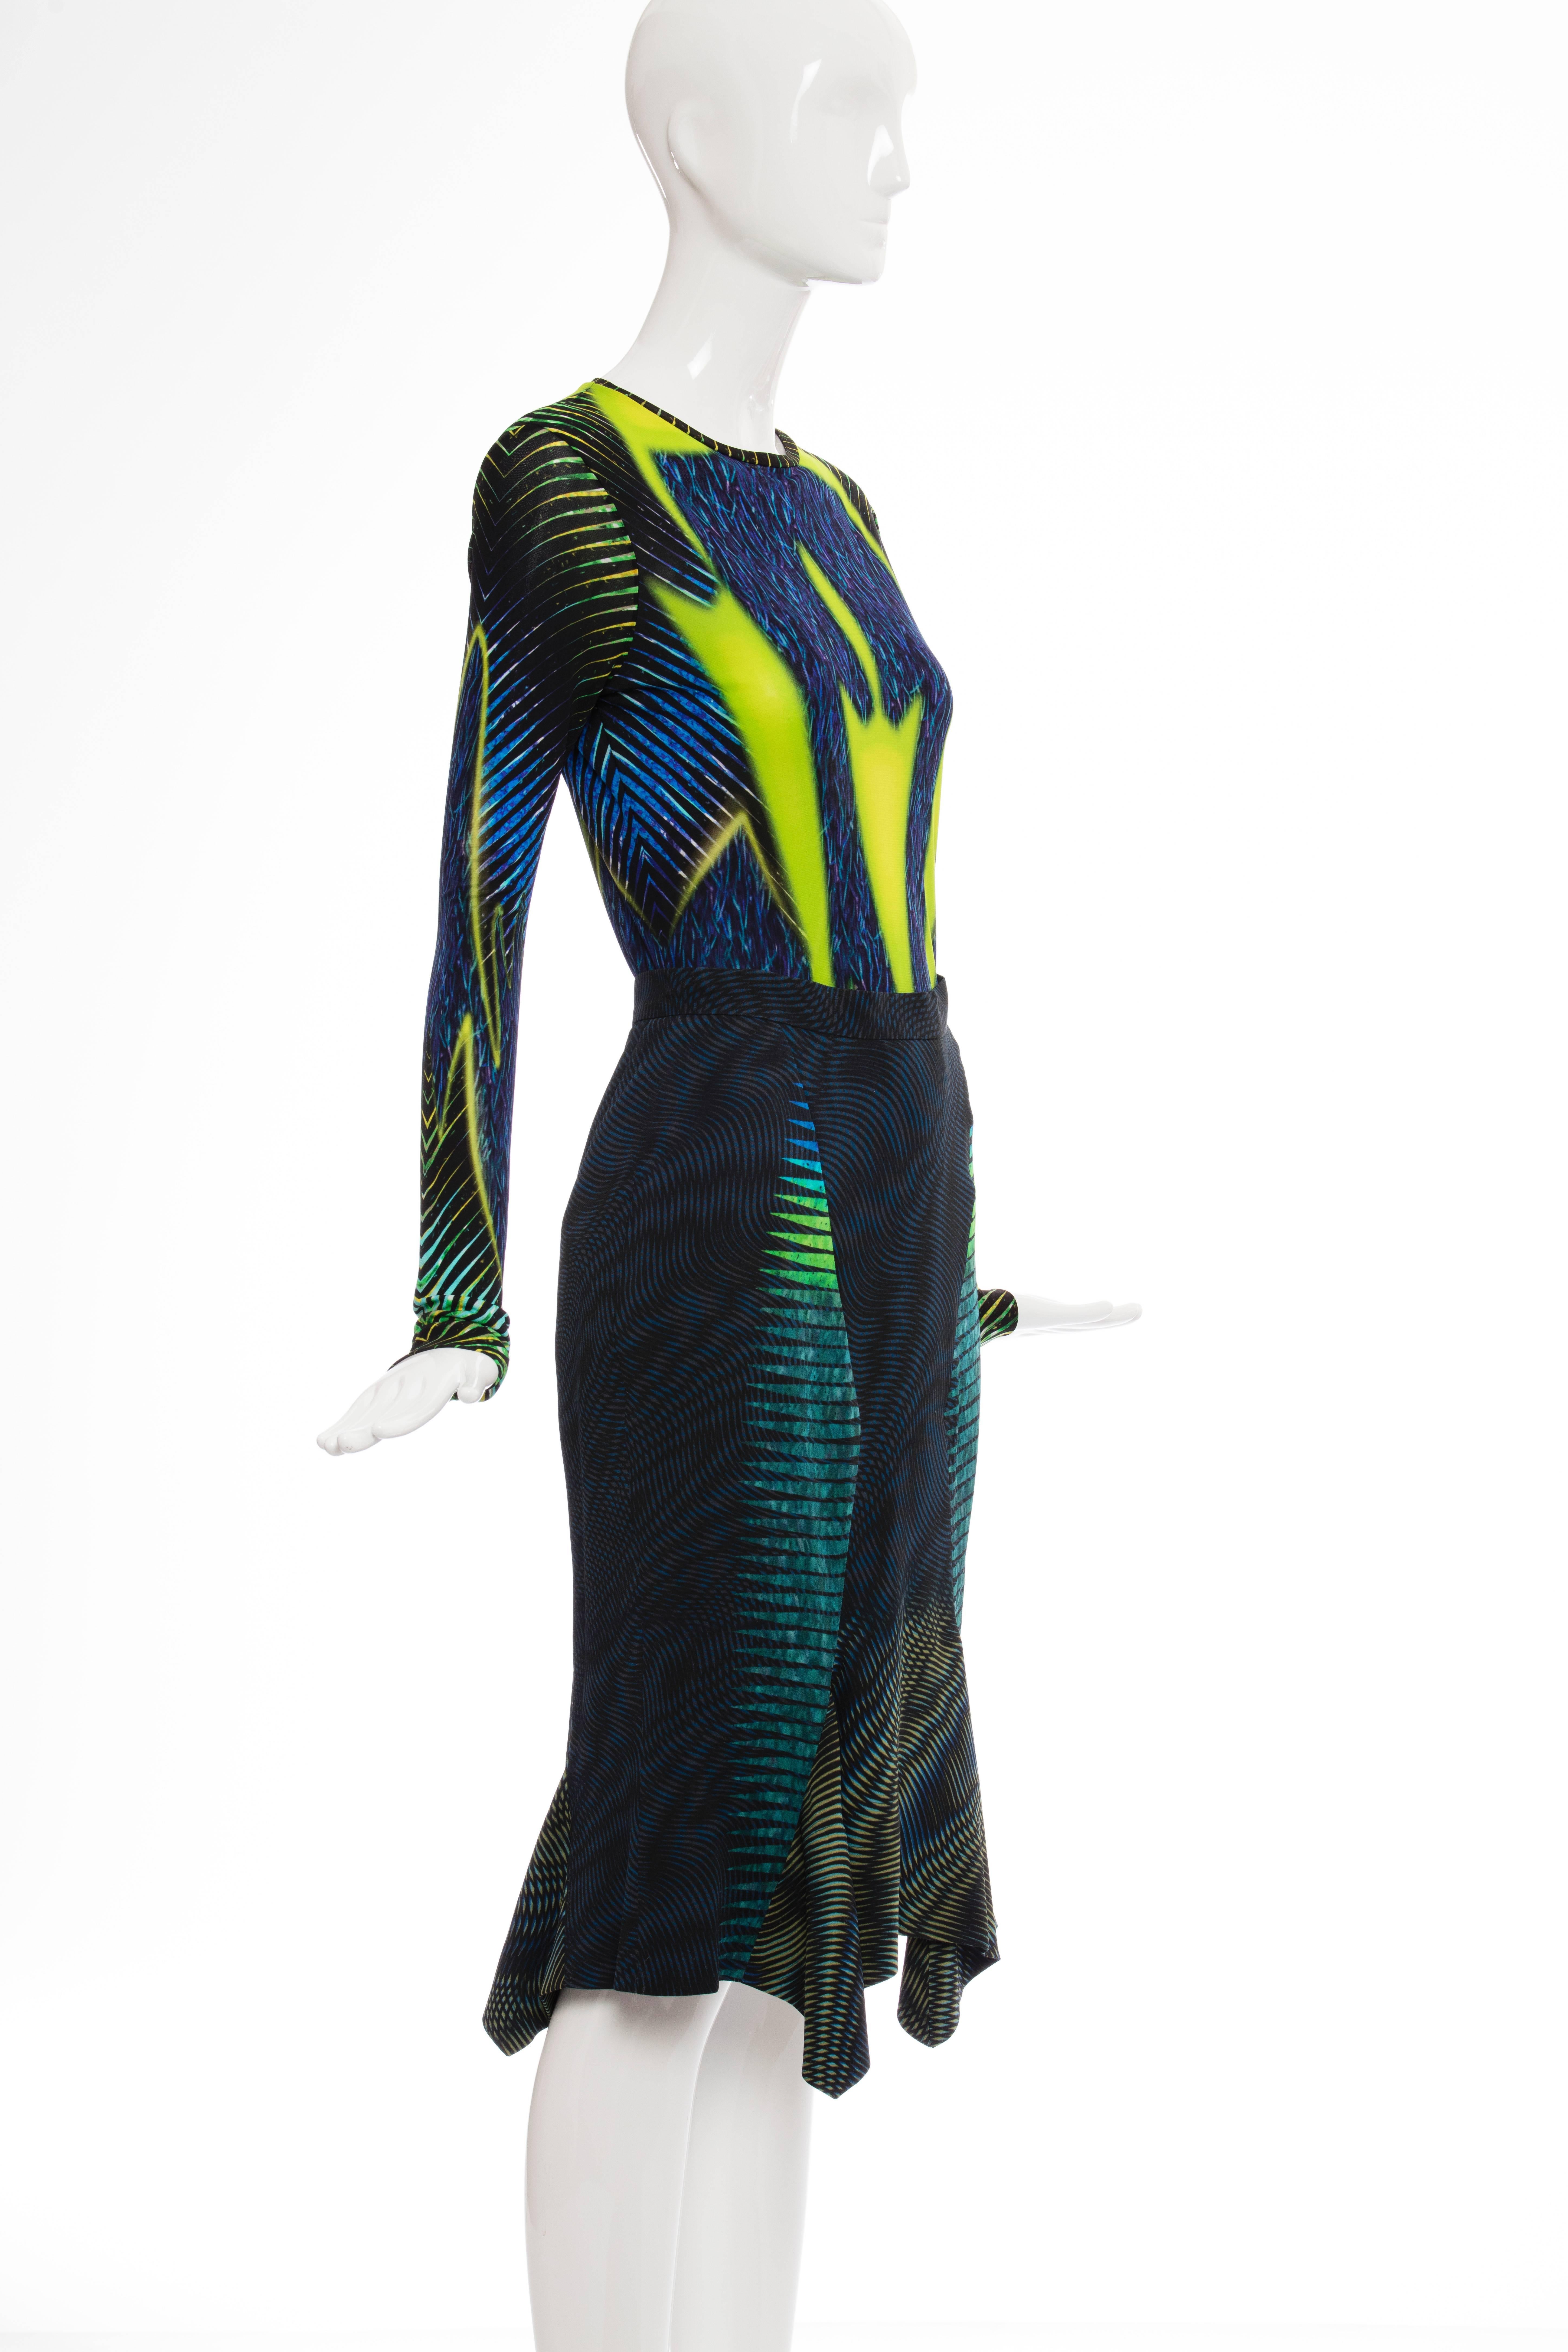 Peter Pilotto, Fall 2012, graphic viscose skirt suit, long sleeve top and trumpet skirt with back zip and fully lined.

UK 8
US 4
IT 40
FR 36